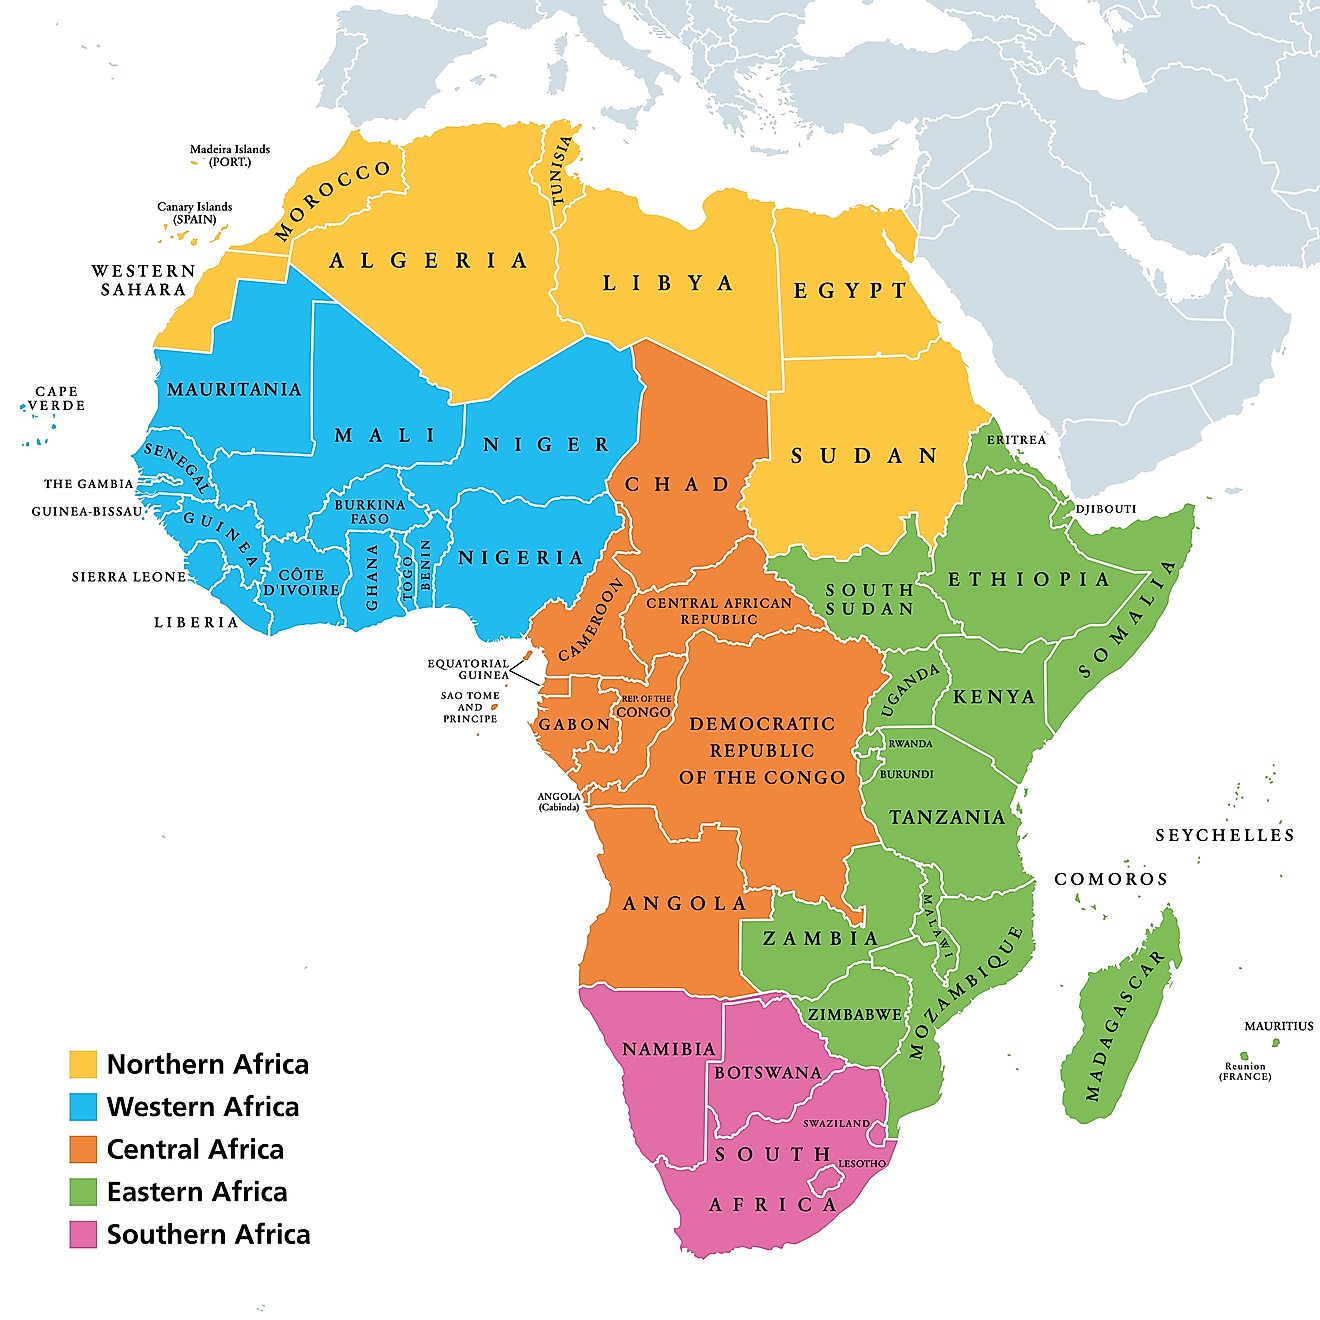 The five regions of Africa.